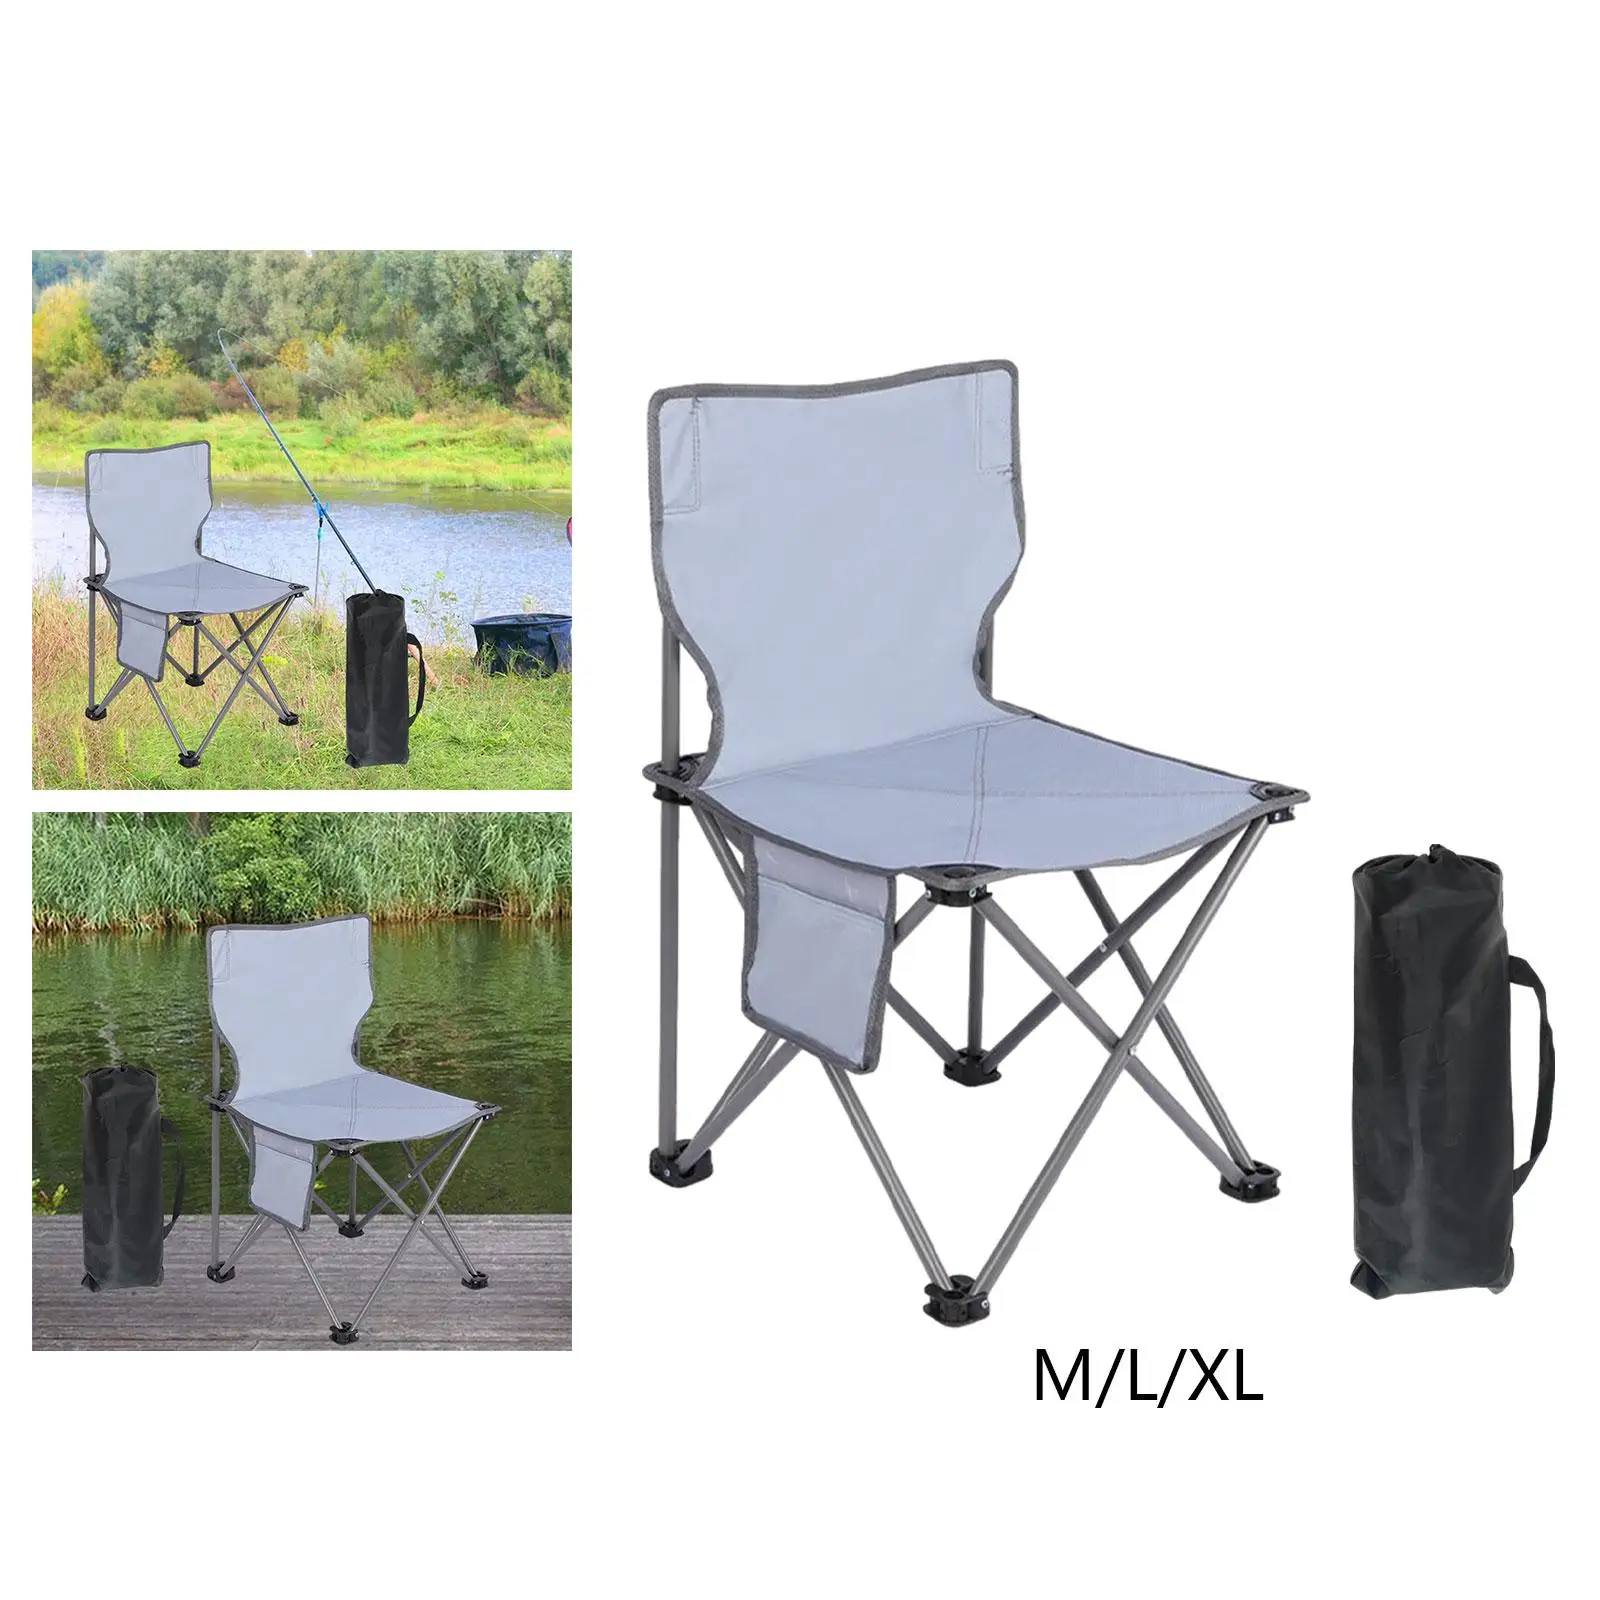 Portable Camping Chair Heavy Duty Oxford Fabric Nonslip with Storage Bag Fishing Chair for Park Picnic Garden Backpacking Beach